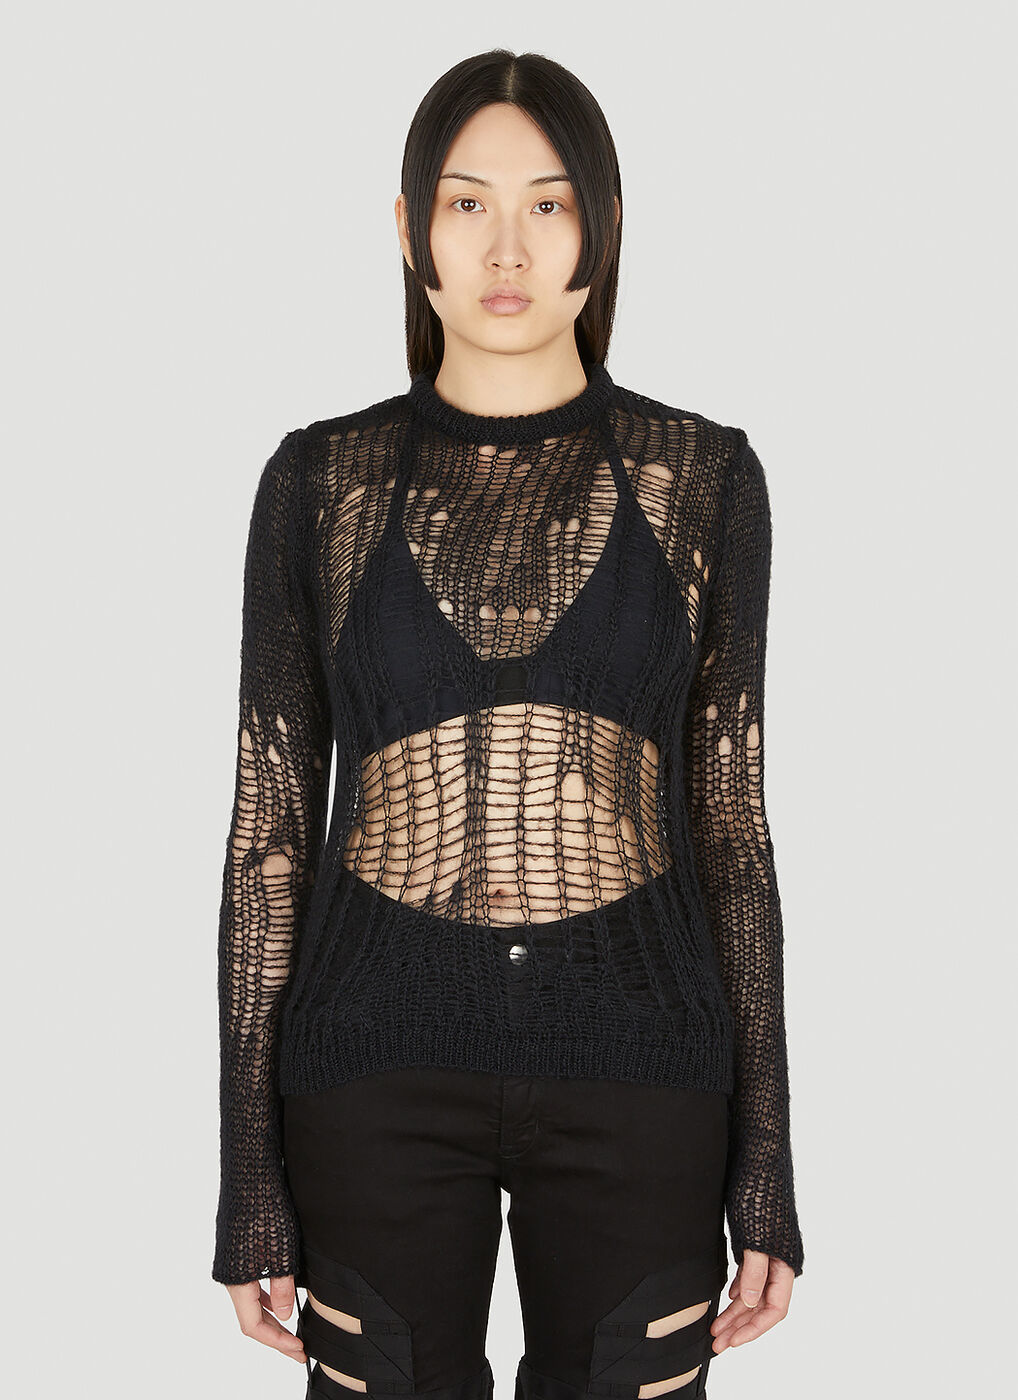 Distressed Spider Knit Sweater in Black